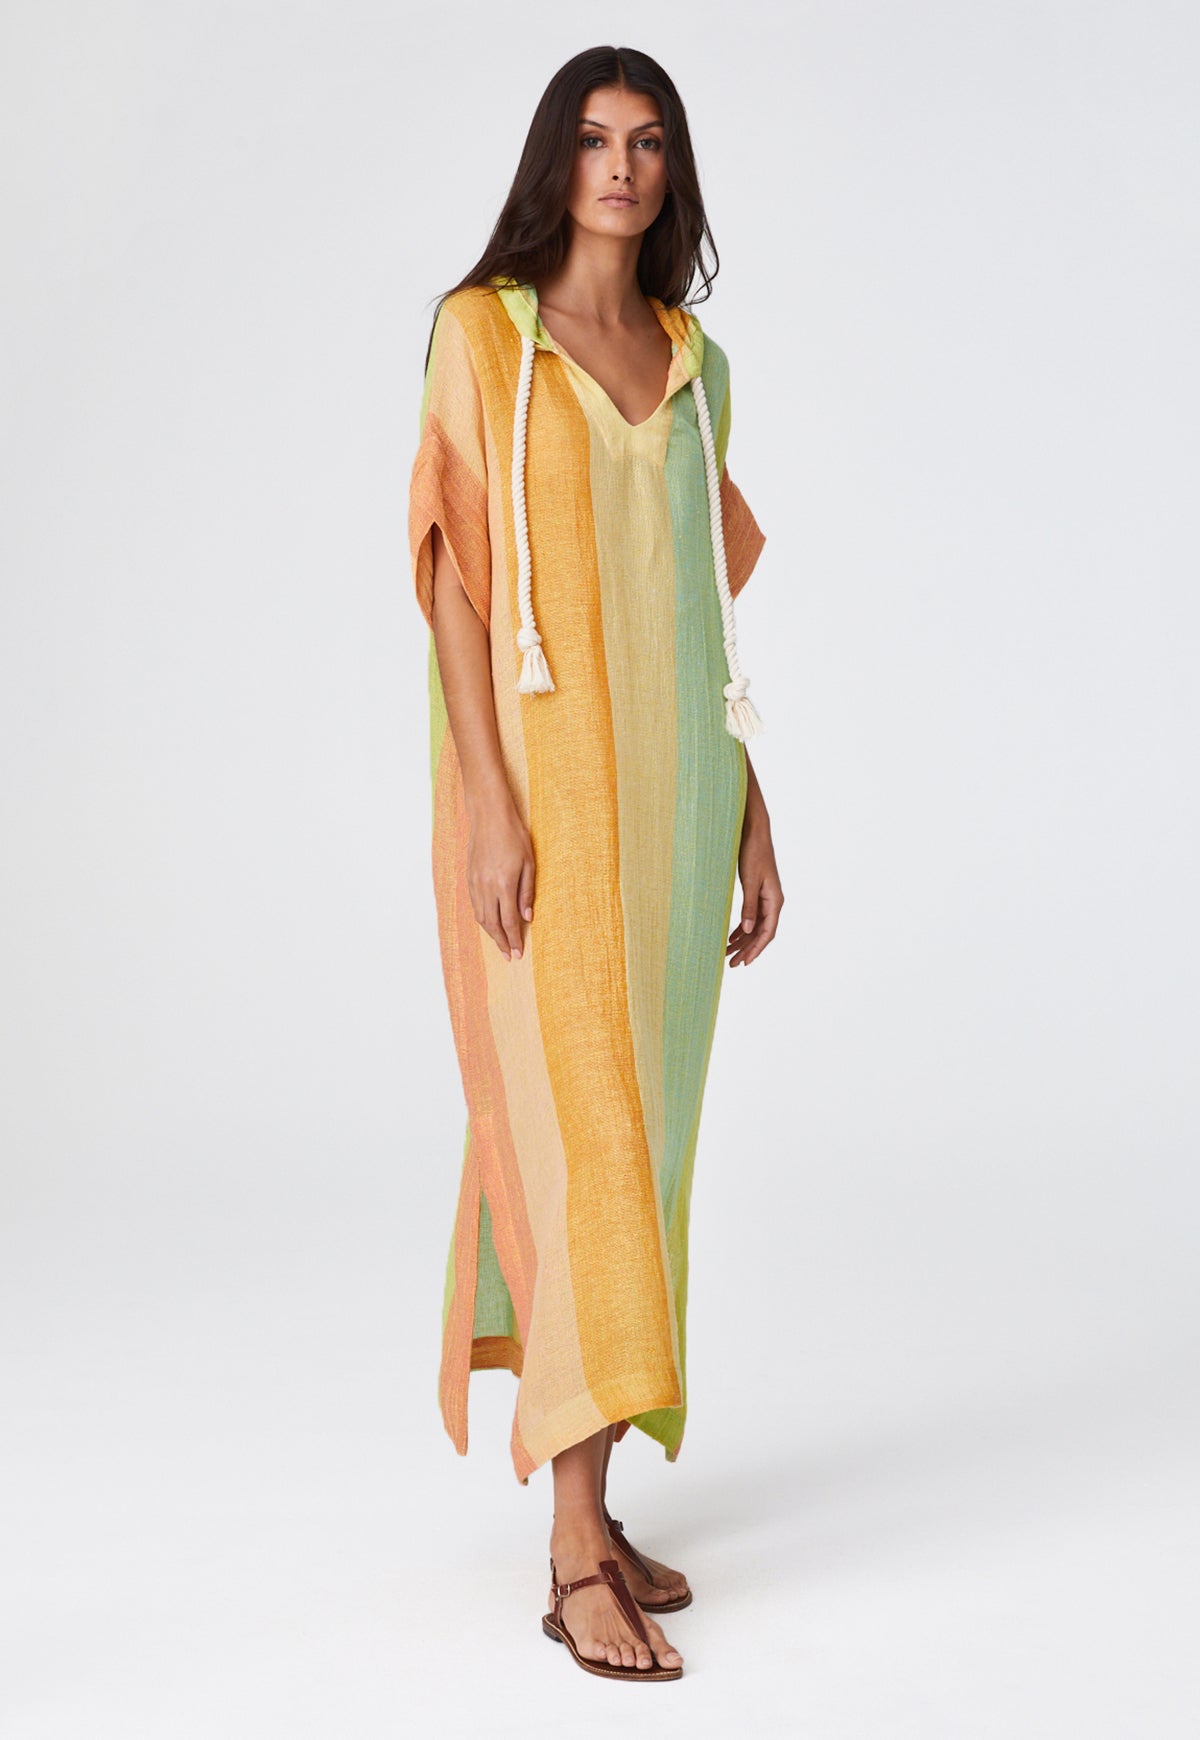 THE DRAWSTRING HOODED CAFTAN in CITRUS AWNING STRIPED GAUZE